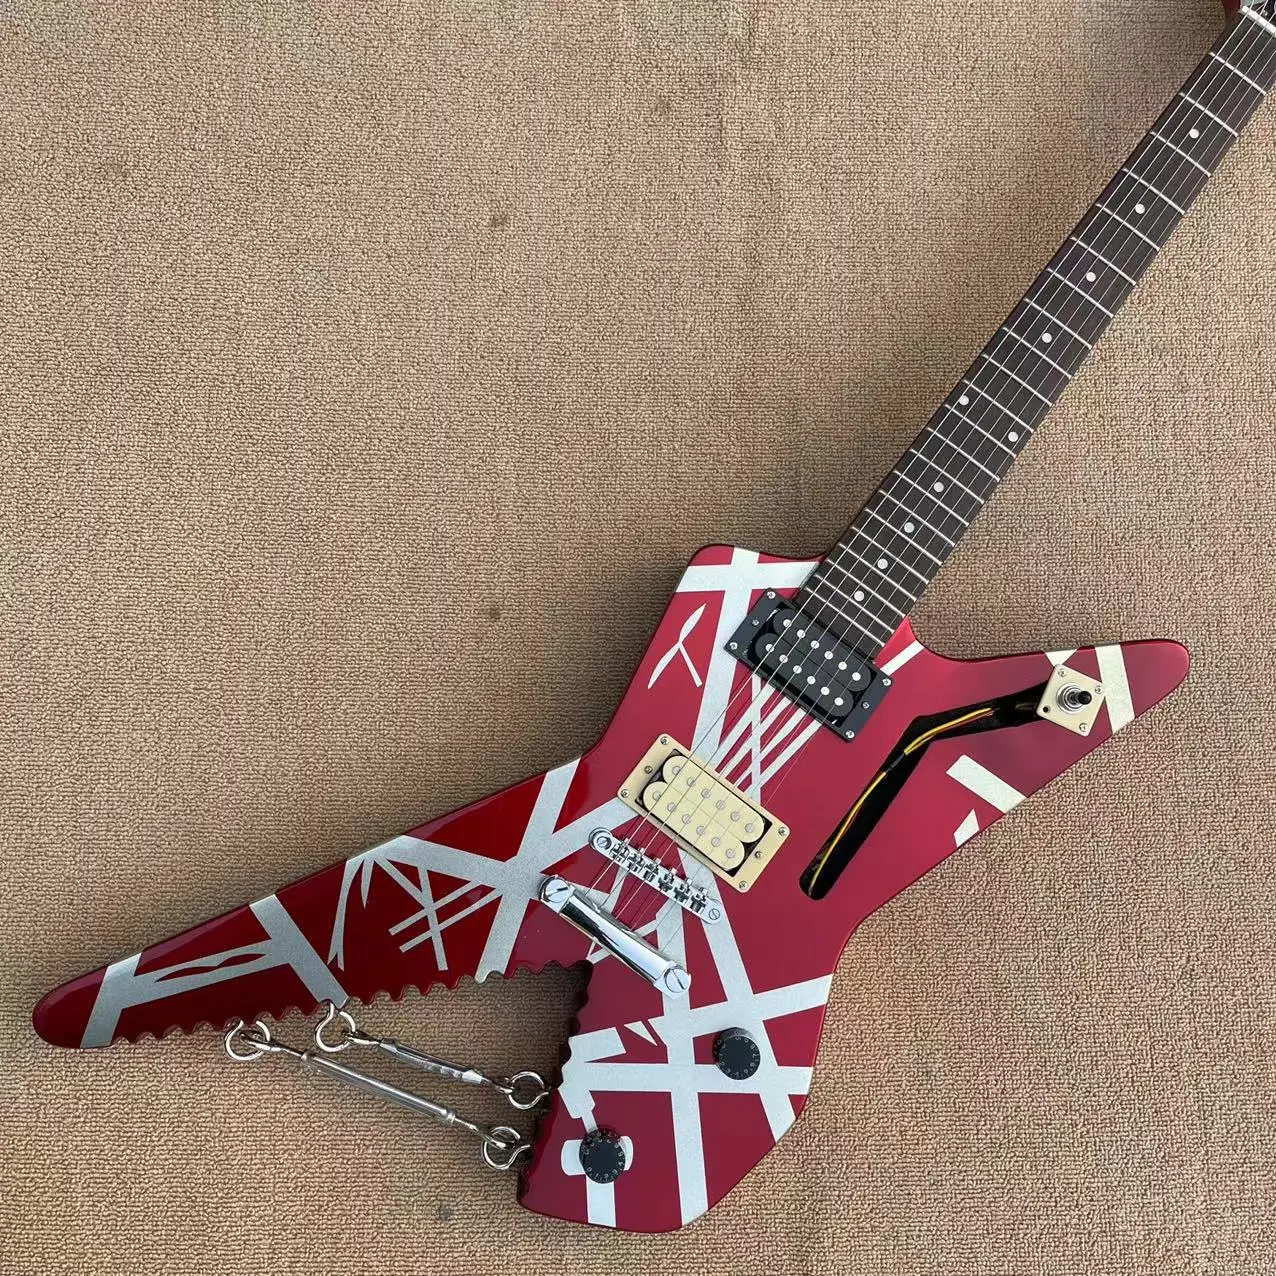 

6-string integrated electric guitar, red body with white stripes, high gloss, rose wood fingerboard, maple neck, open pickup, in